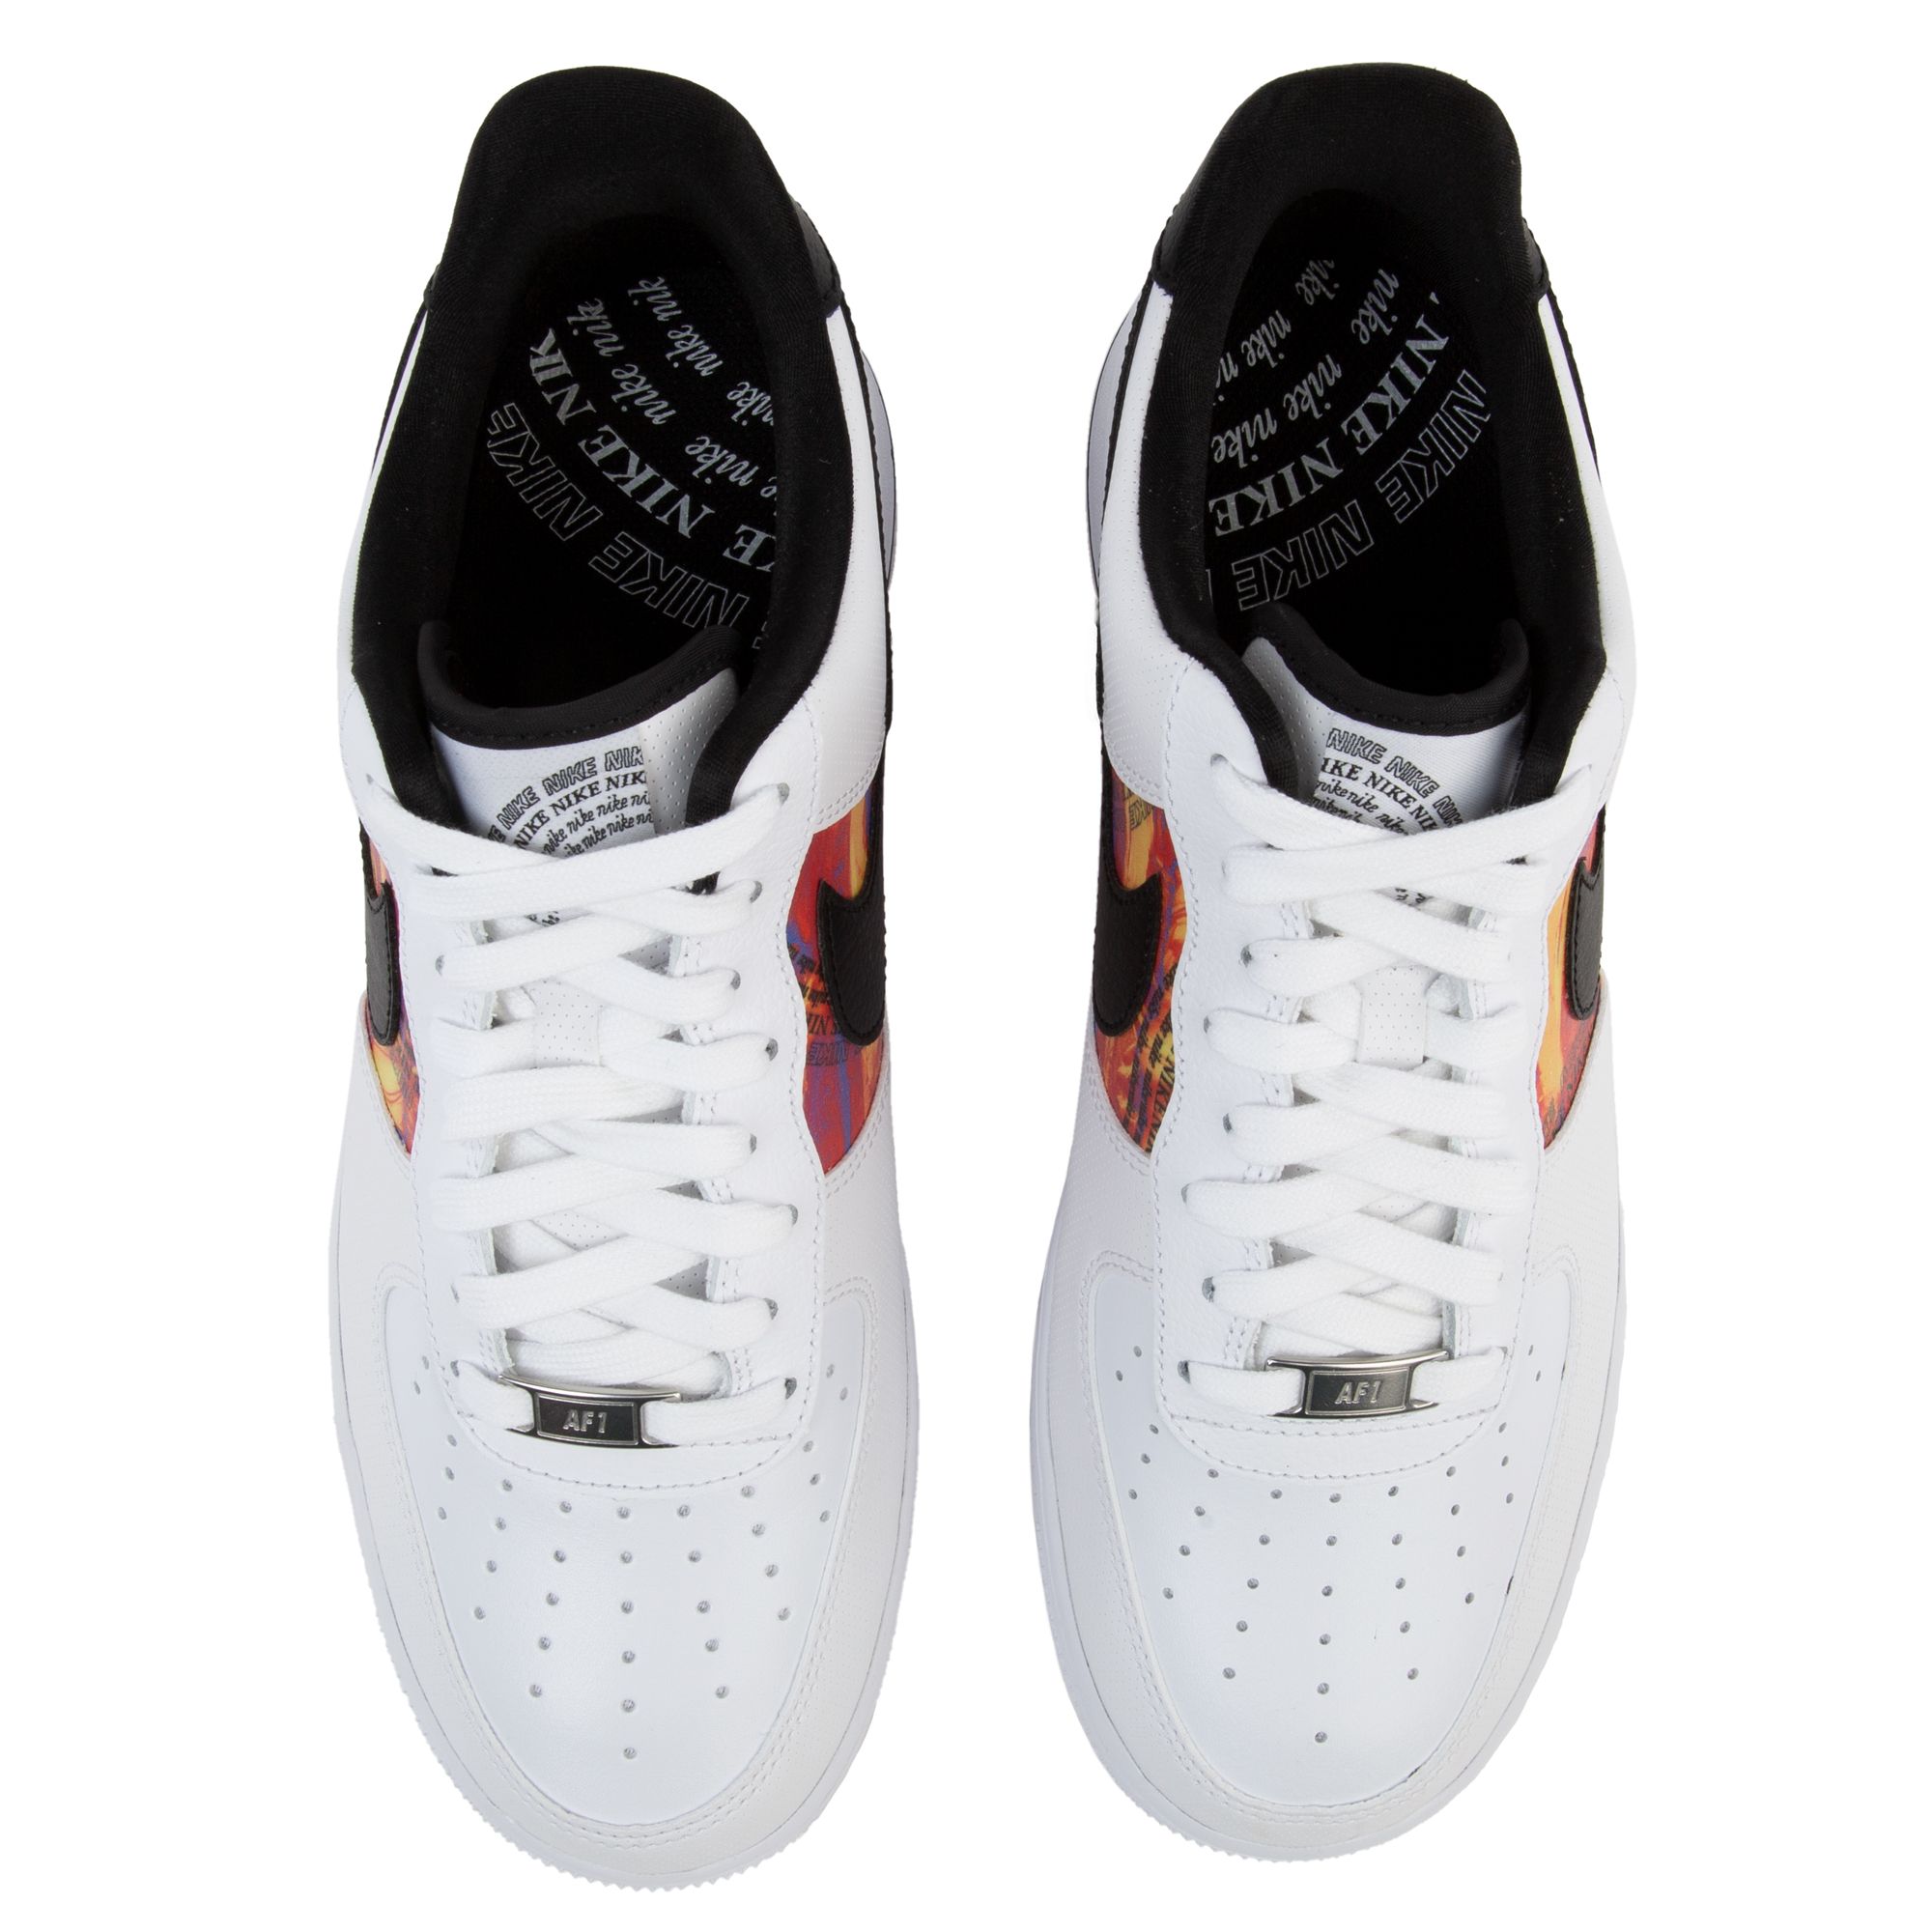 Nike - Air Force 1 LV8 1 - DR3098100 - Color: White - Size: 7 Big